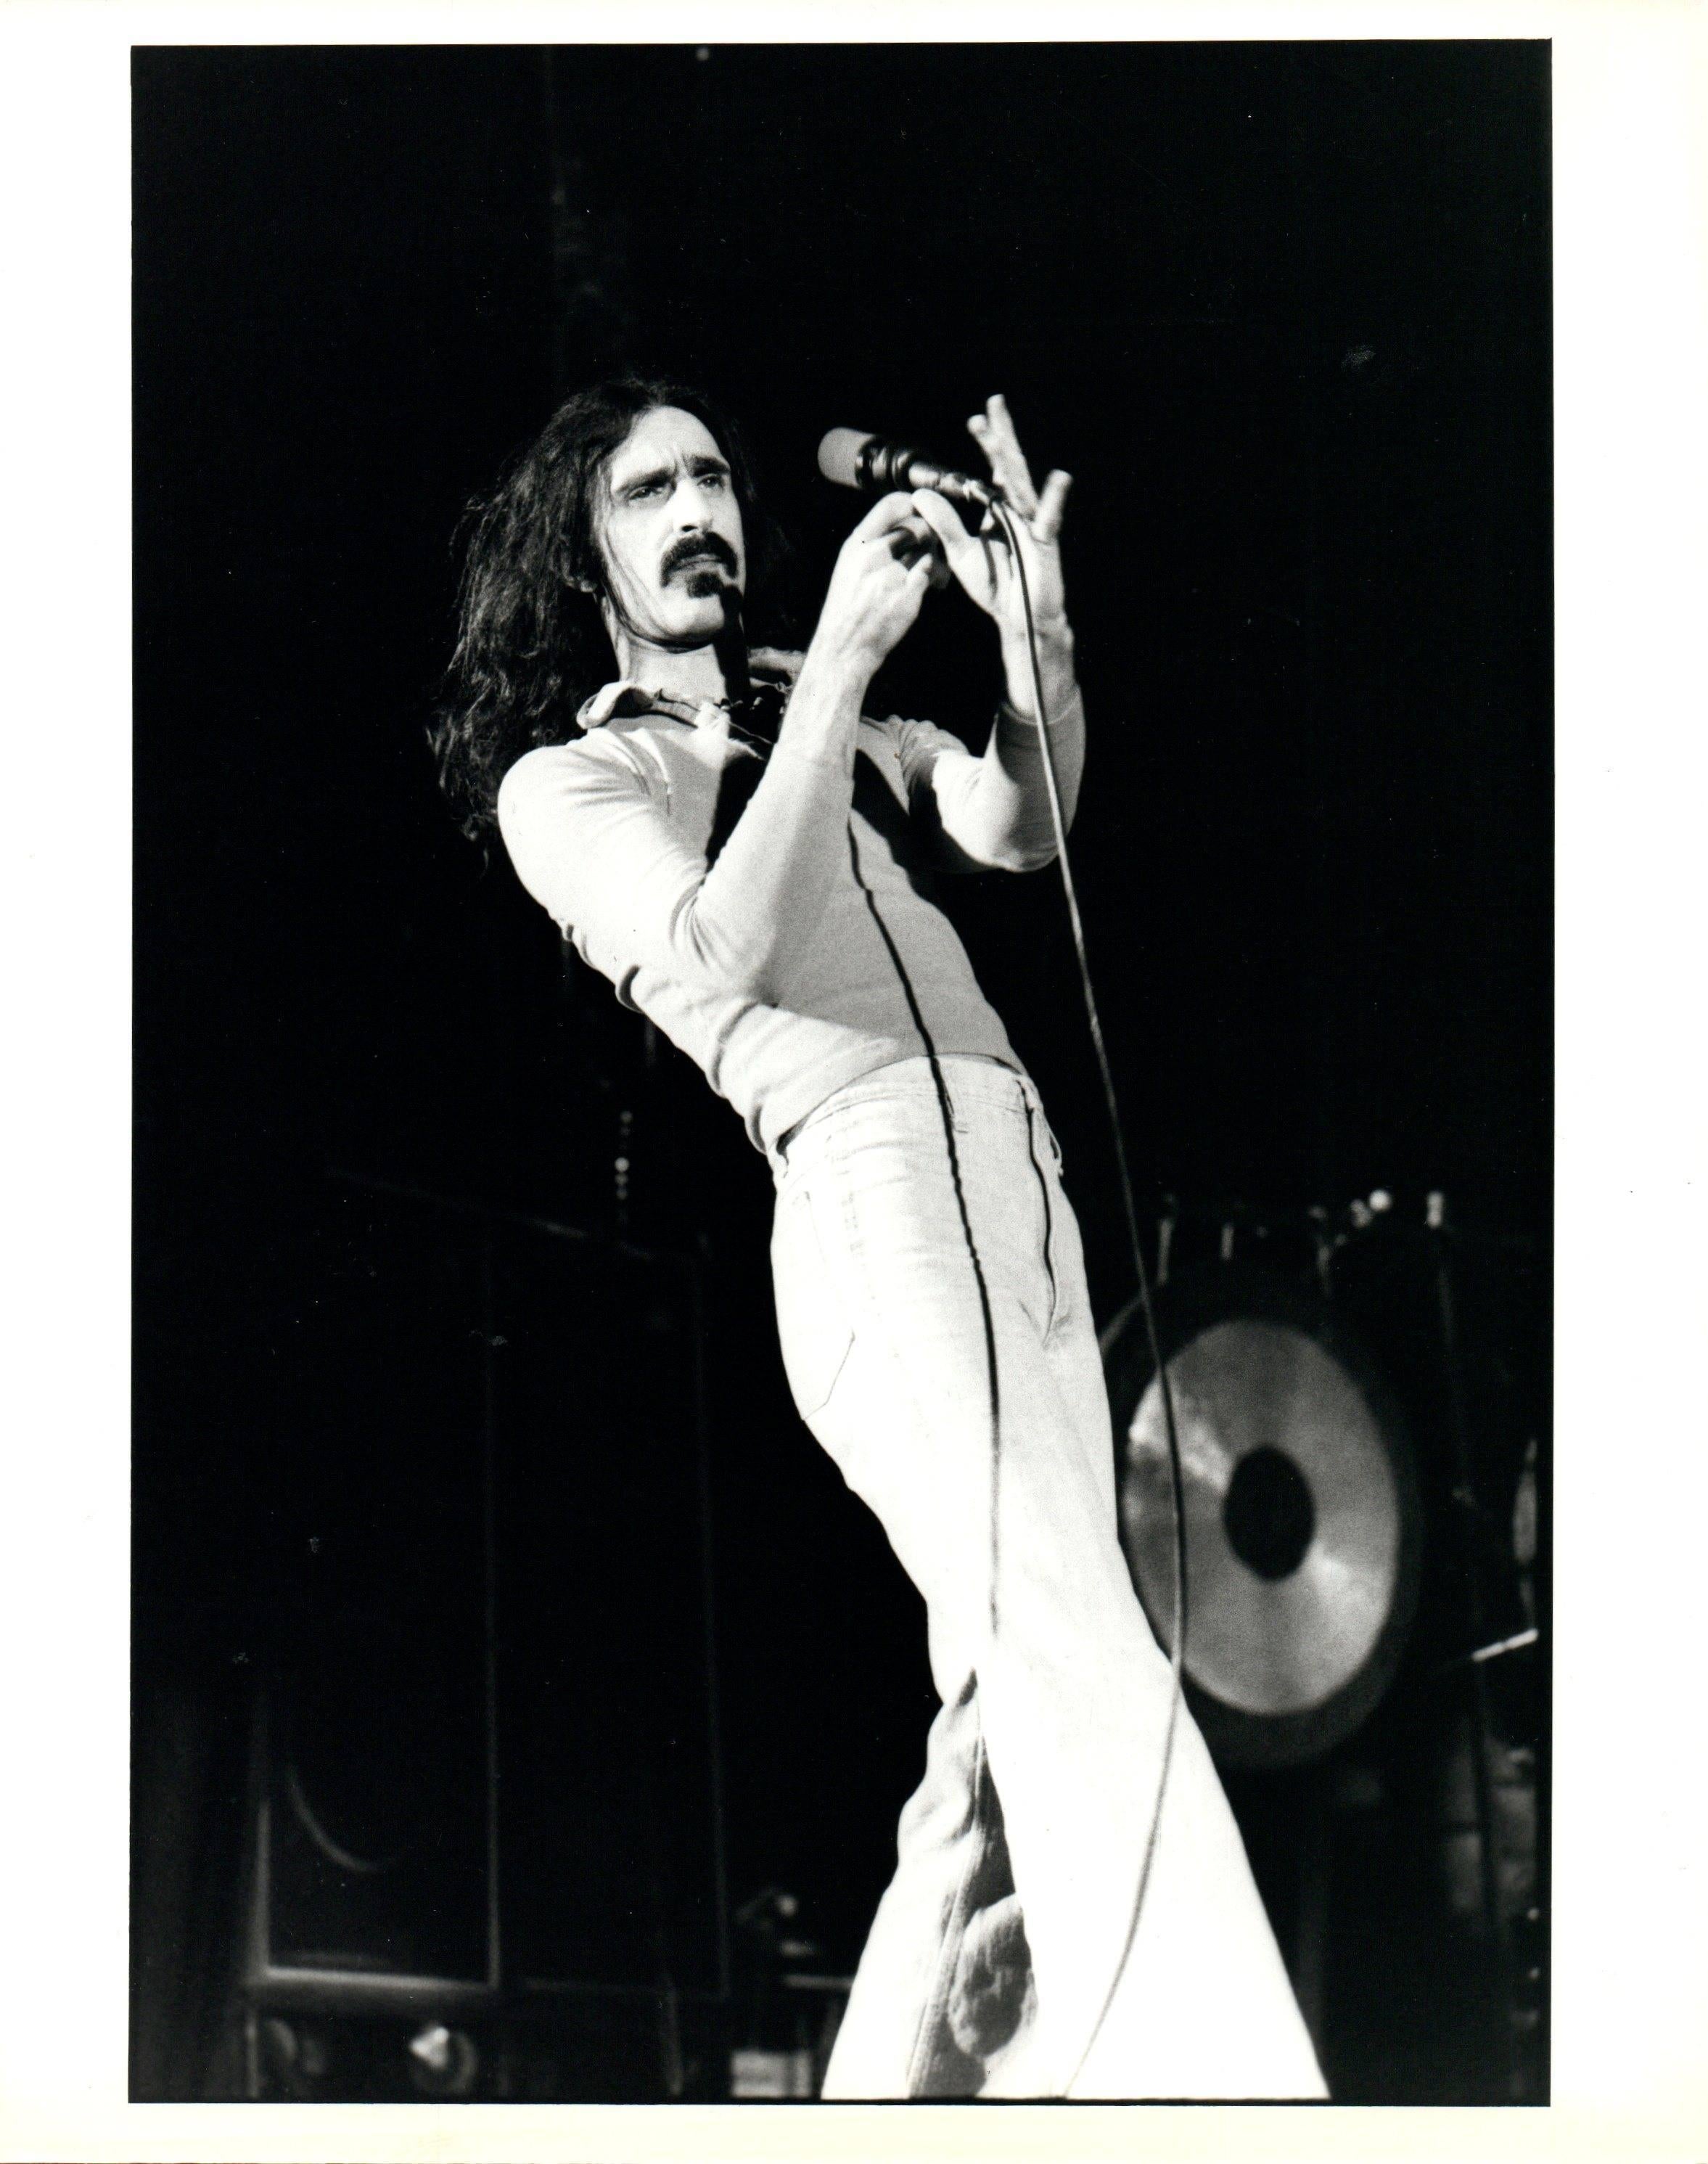 Paul Canty Portrait Photograph - Frank Zappa on Stage Holding Mic Vintage Original Photograph